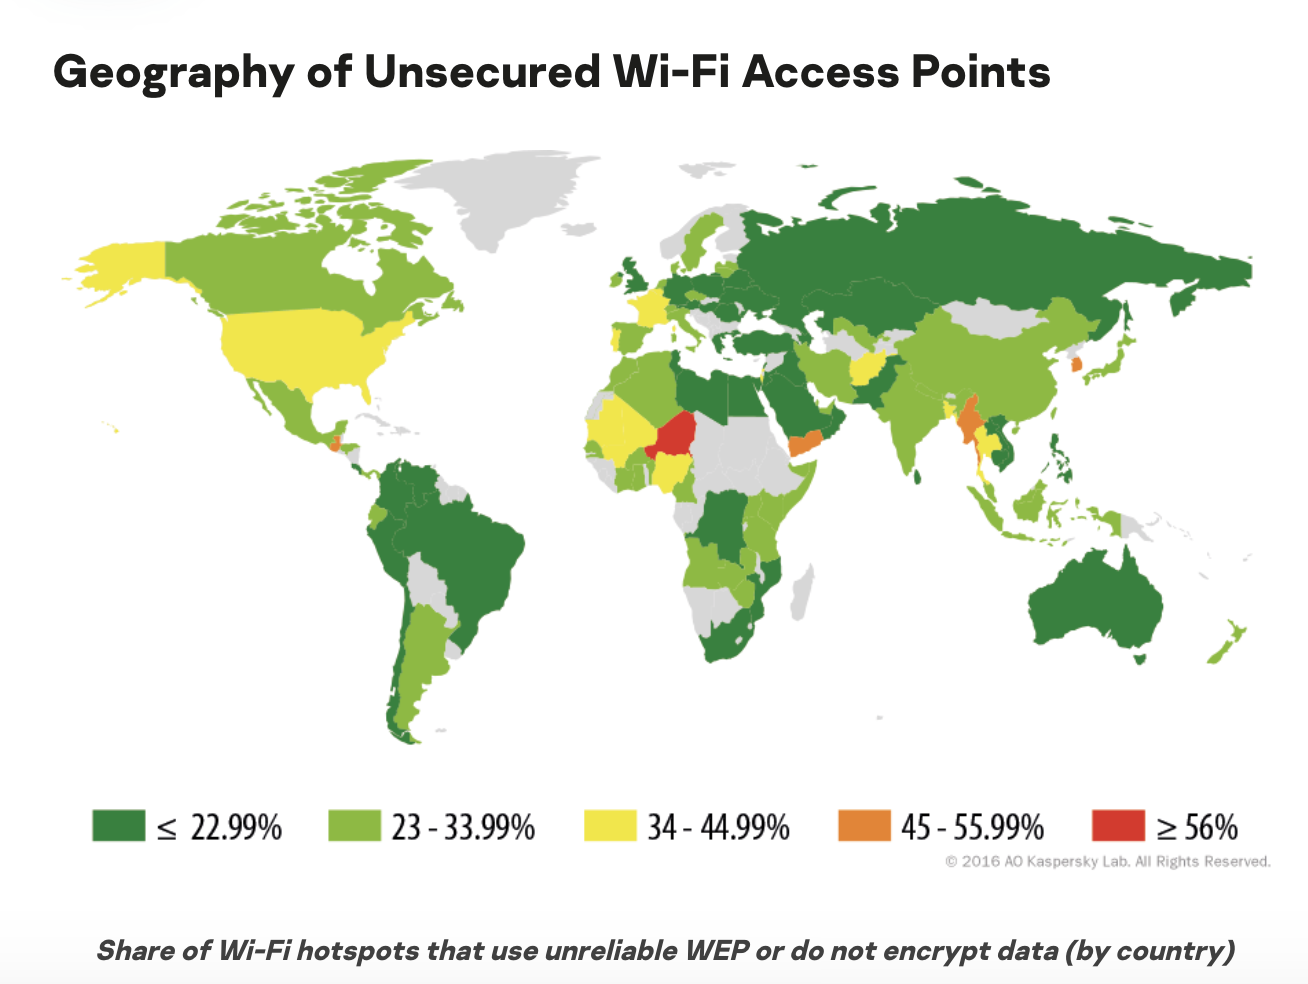 Map showing the geography of unsecured wi-fi access points